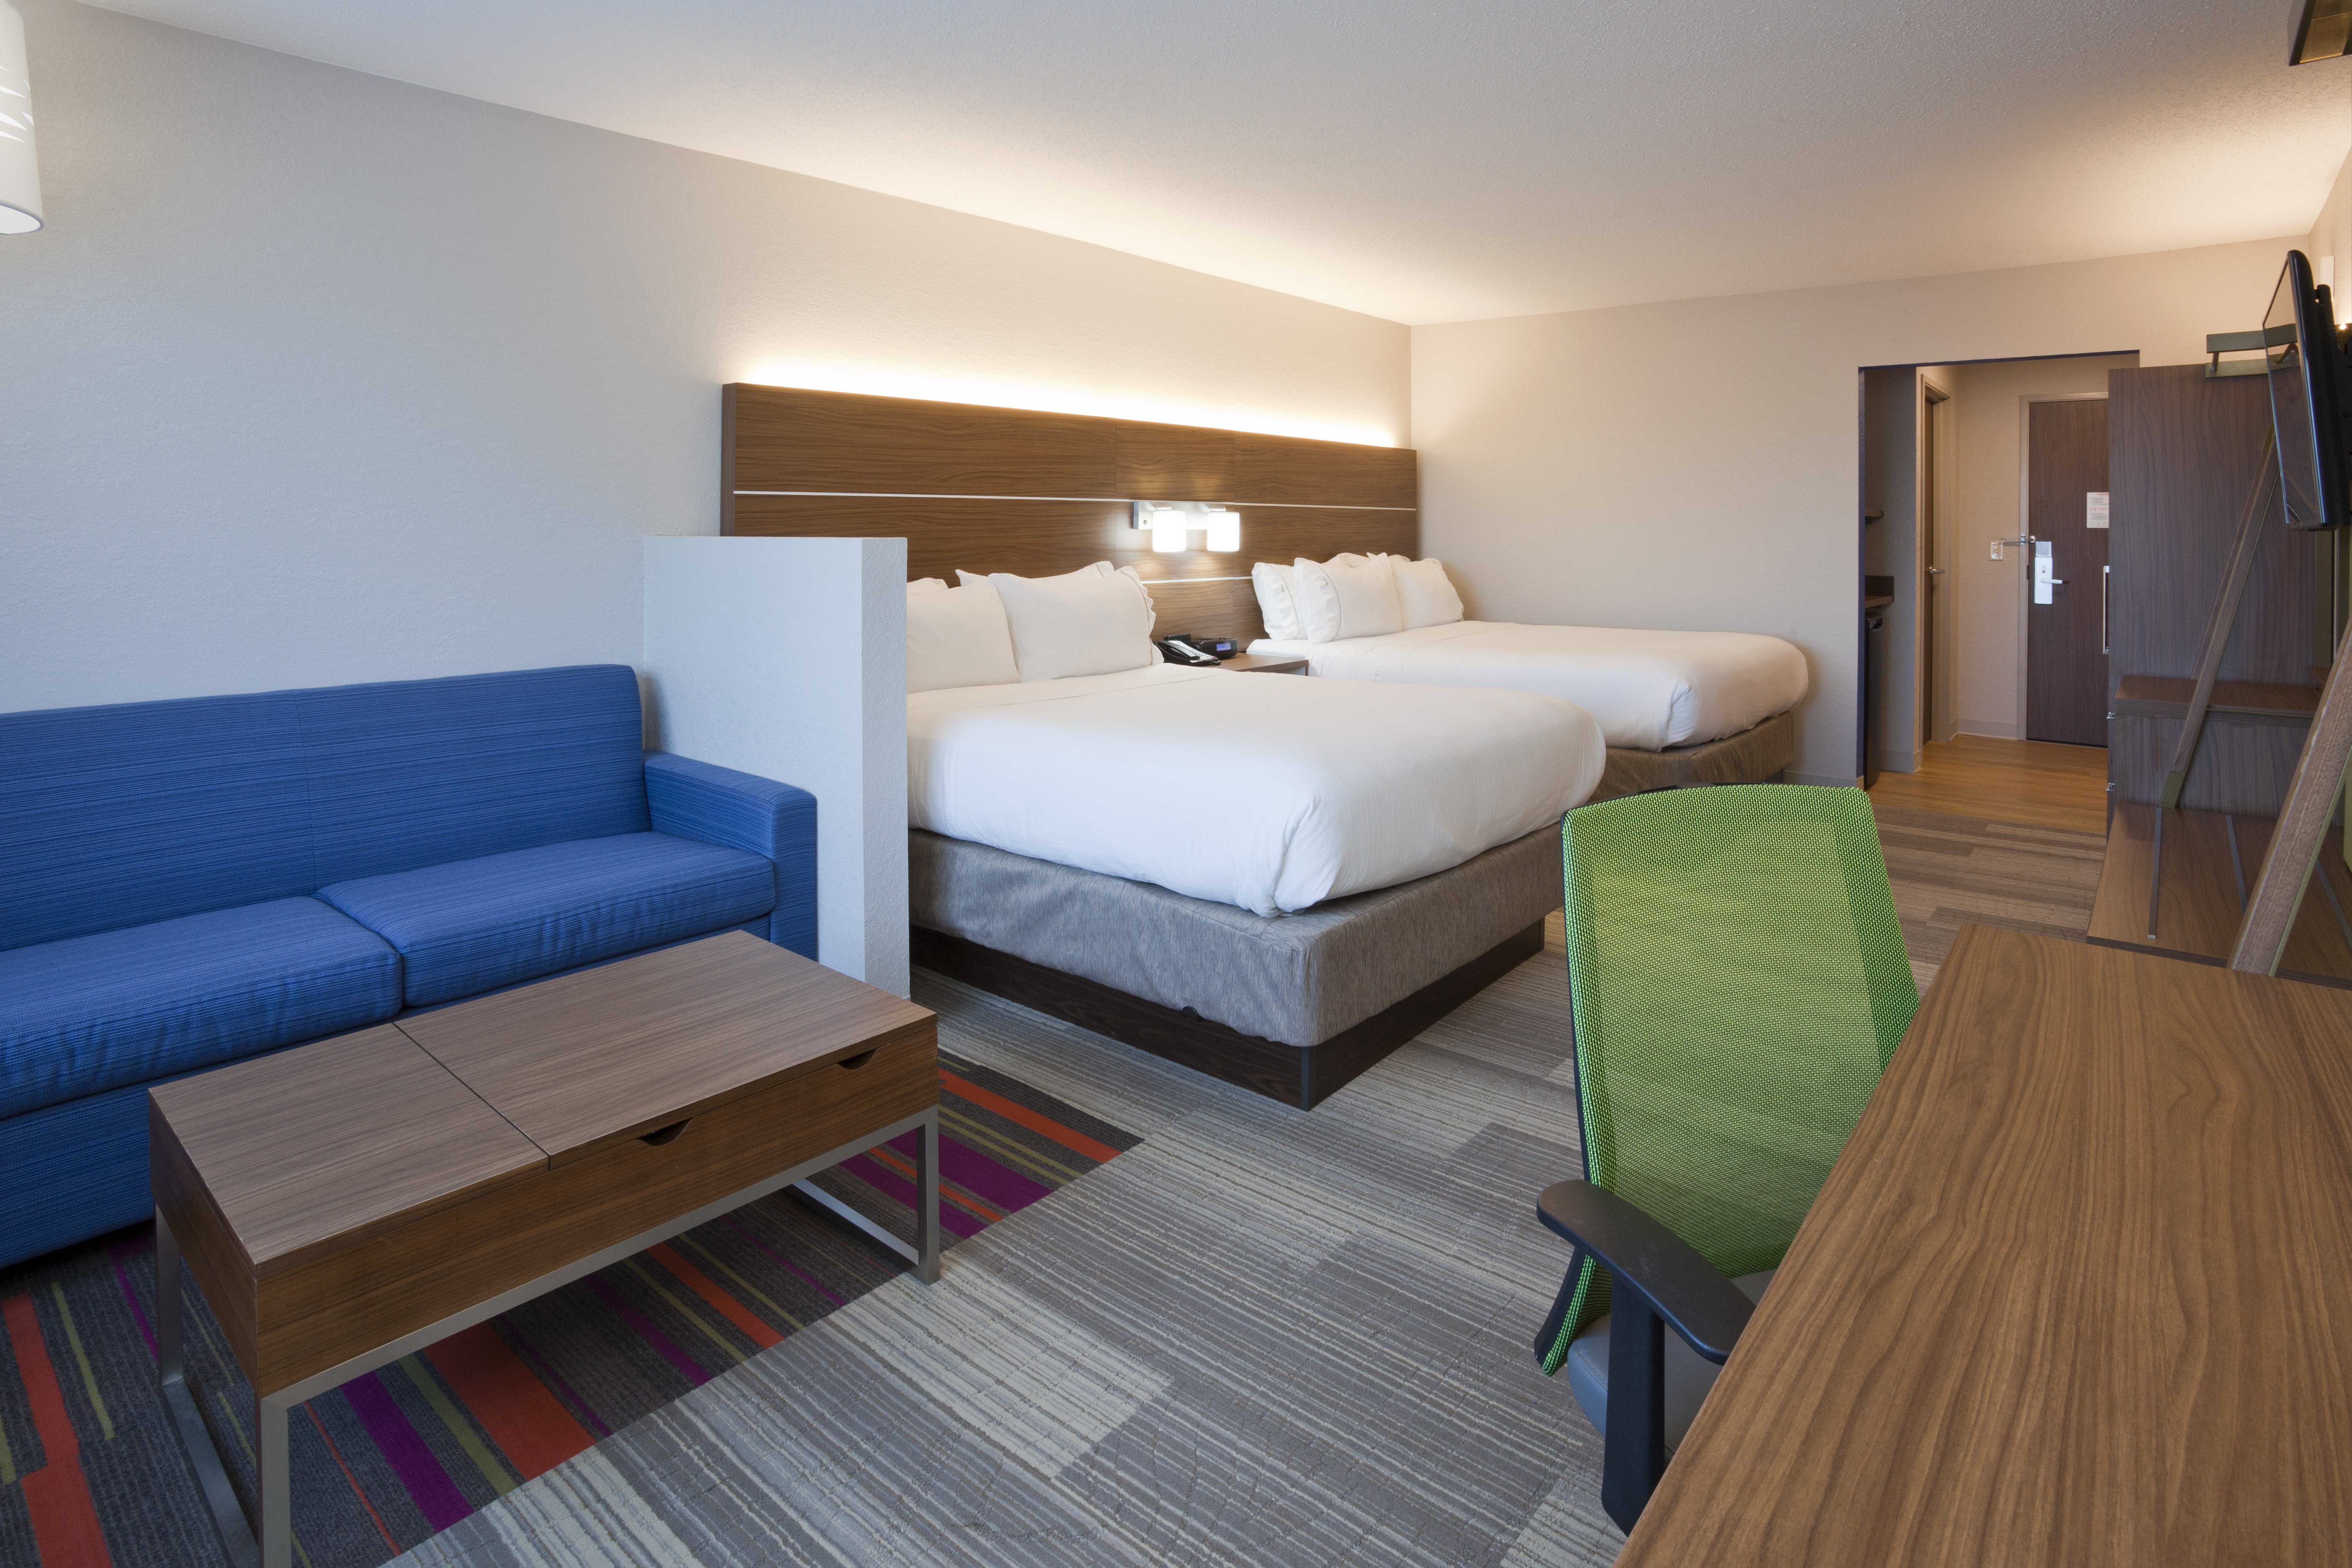 Our 2 Queen bed suites with large sofa bed are great for families!